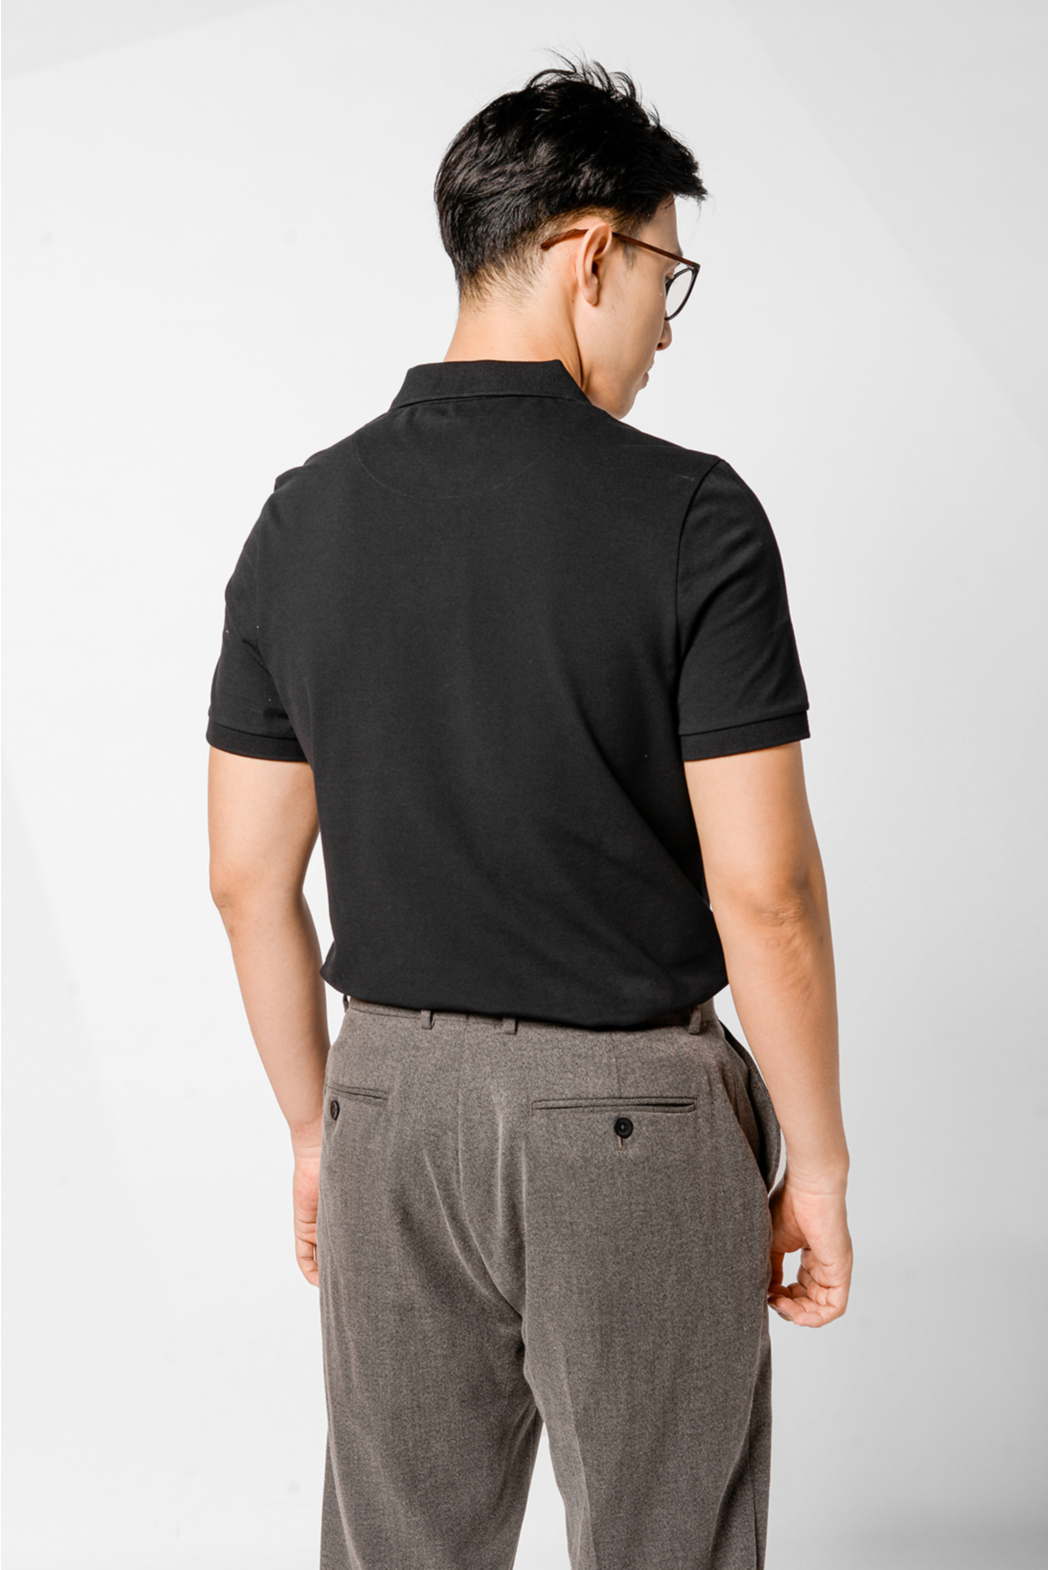 Áo Polo Cotton Form Fitted - 10S21POL001C